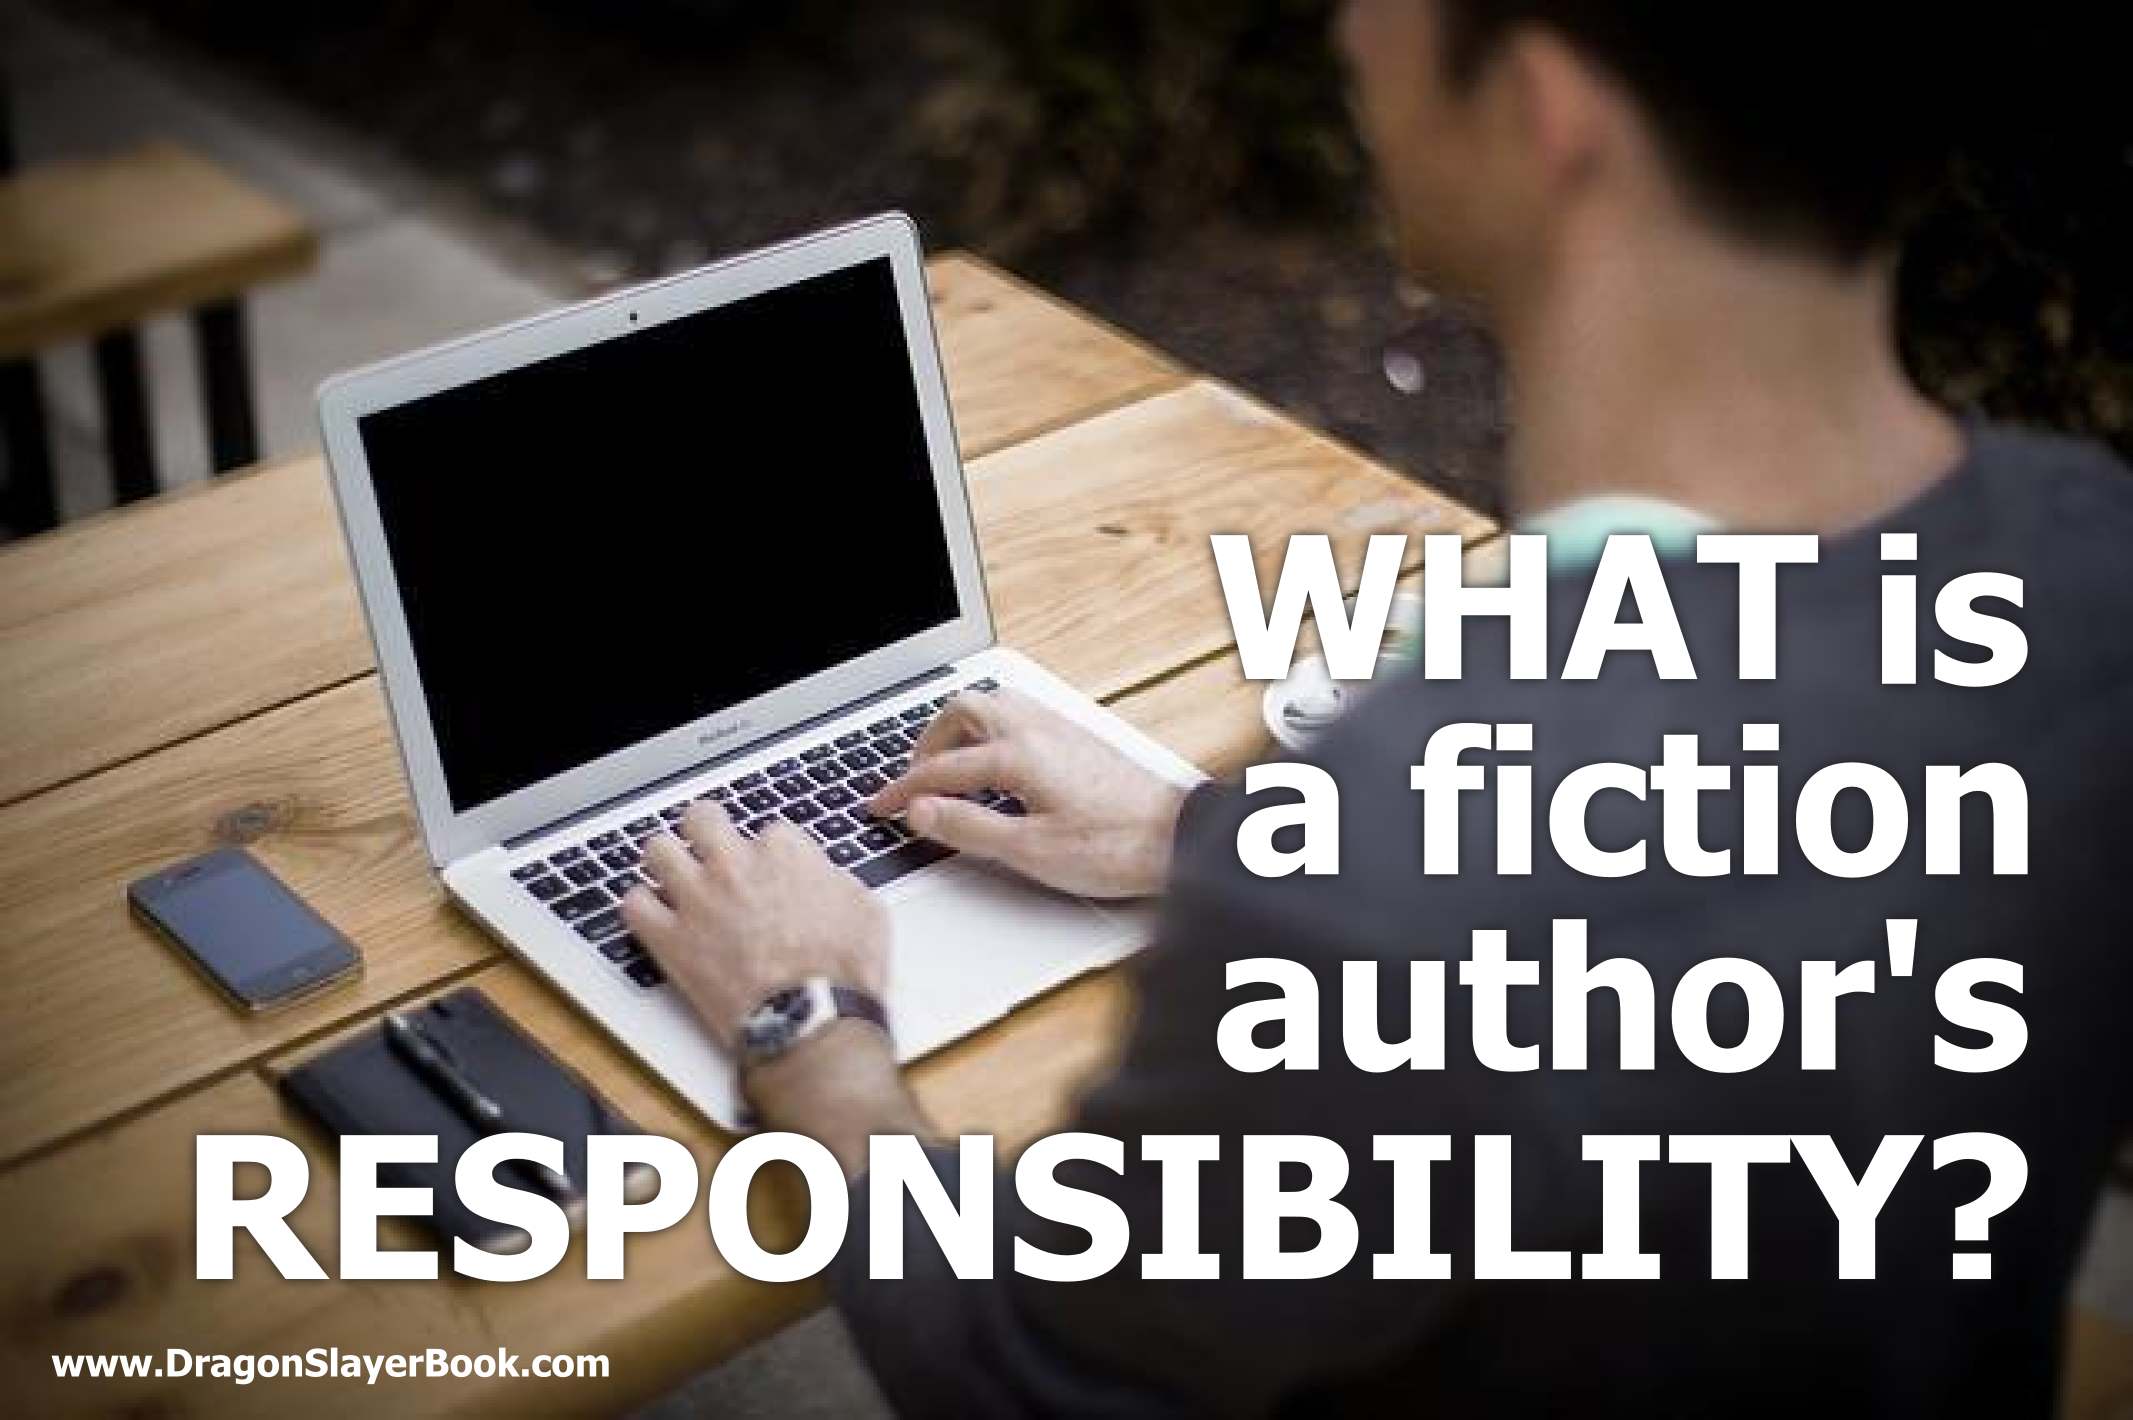 What is a fiction author’s responsibility to the world?